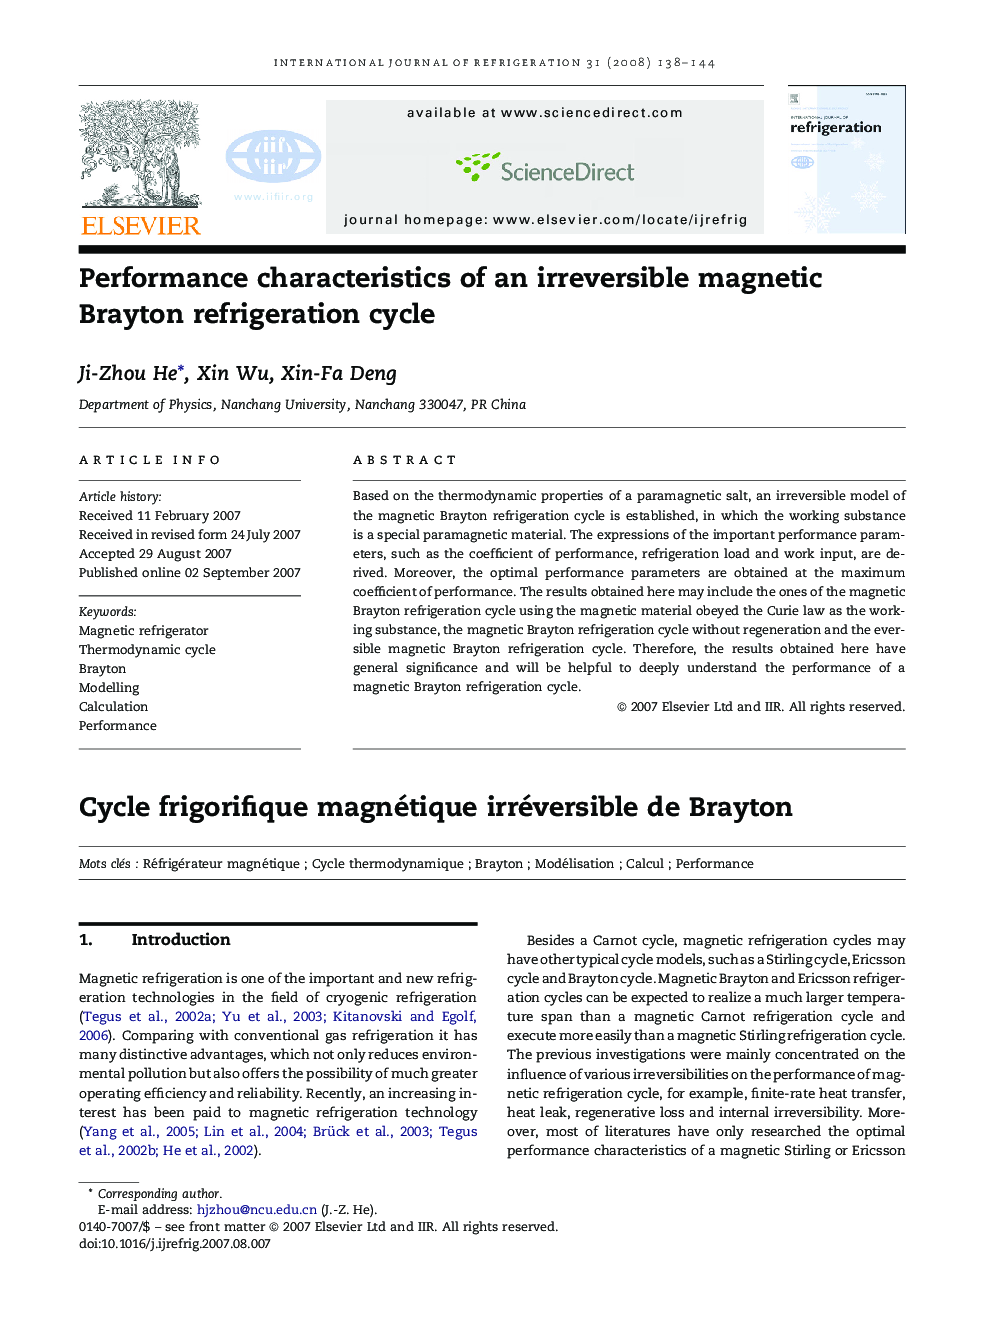 Performance characteristics of an irreversible magnetic Brayton refrigeration cycle